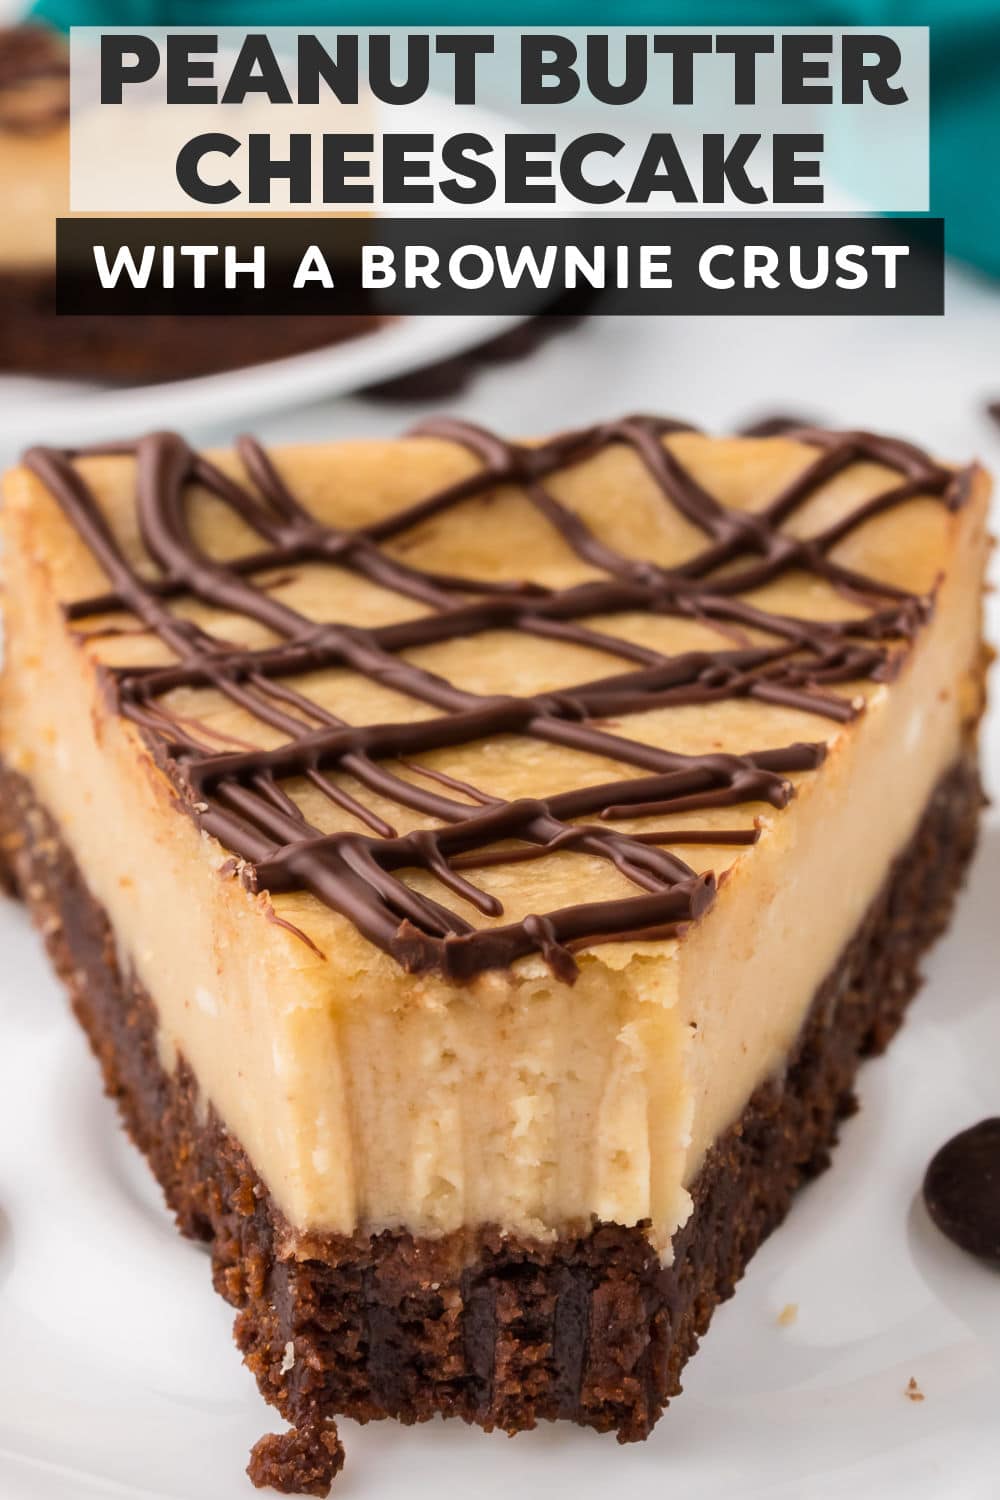 Brownie Bottom Peanut Butter Cheesecake has a chewy brownie layer topped with a creamy peanut butter cheesecake and drizzled with rich chocolate. The perfect sinful cheesecake for large gatherings or just because. | www.persnicketyplates.com